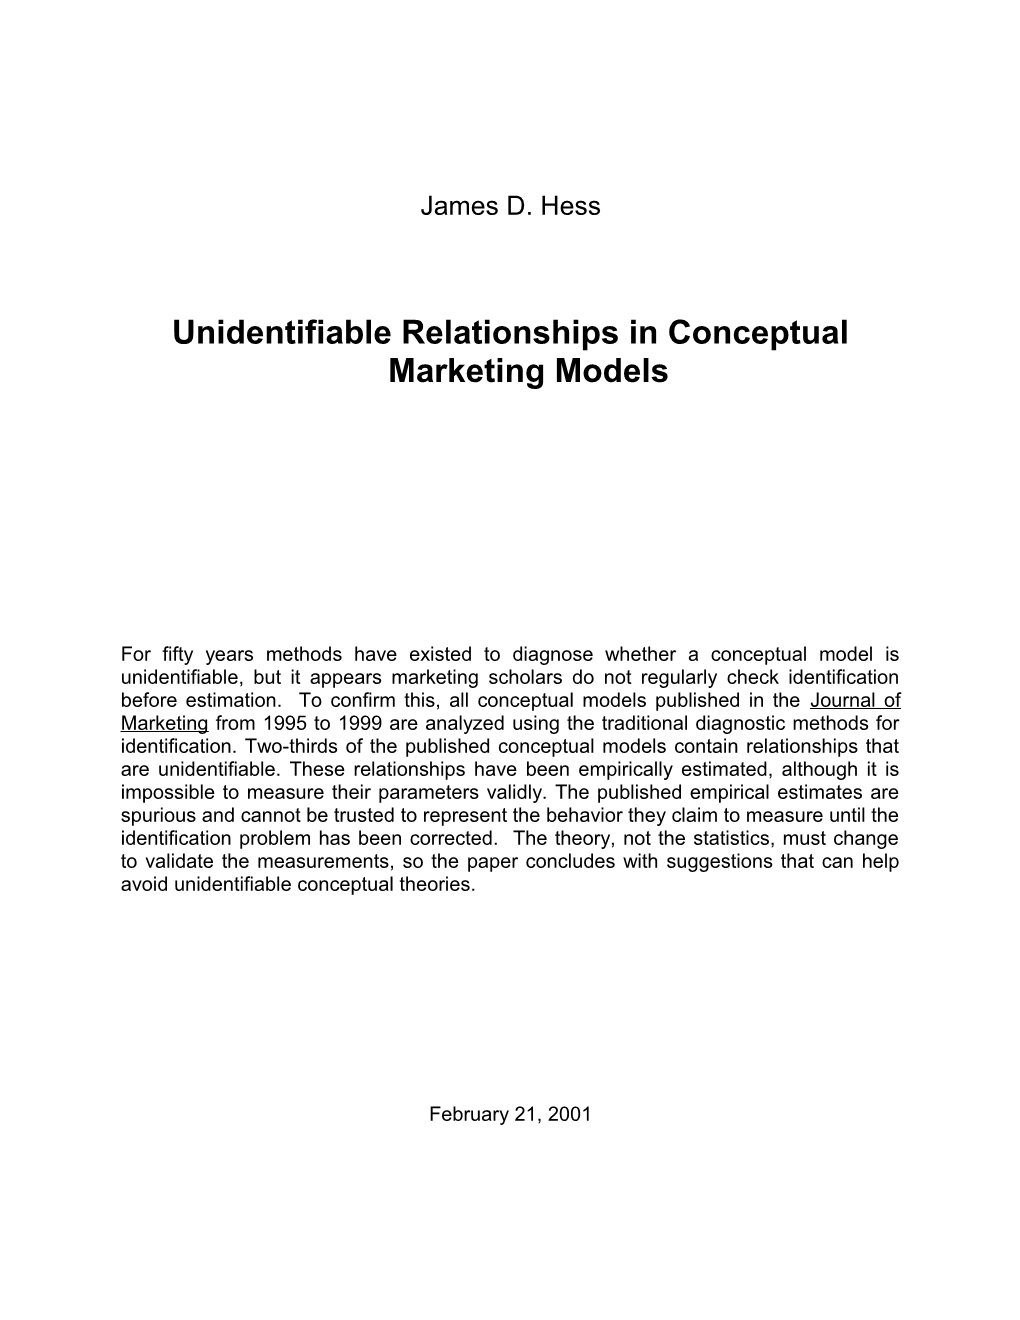 Unidentifiable Relationships in Conceptual Marketing Models